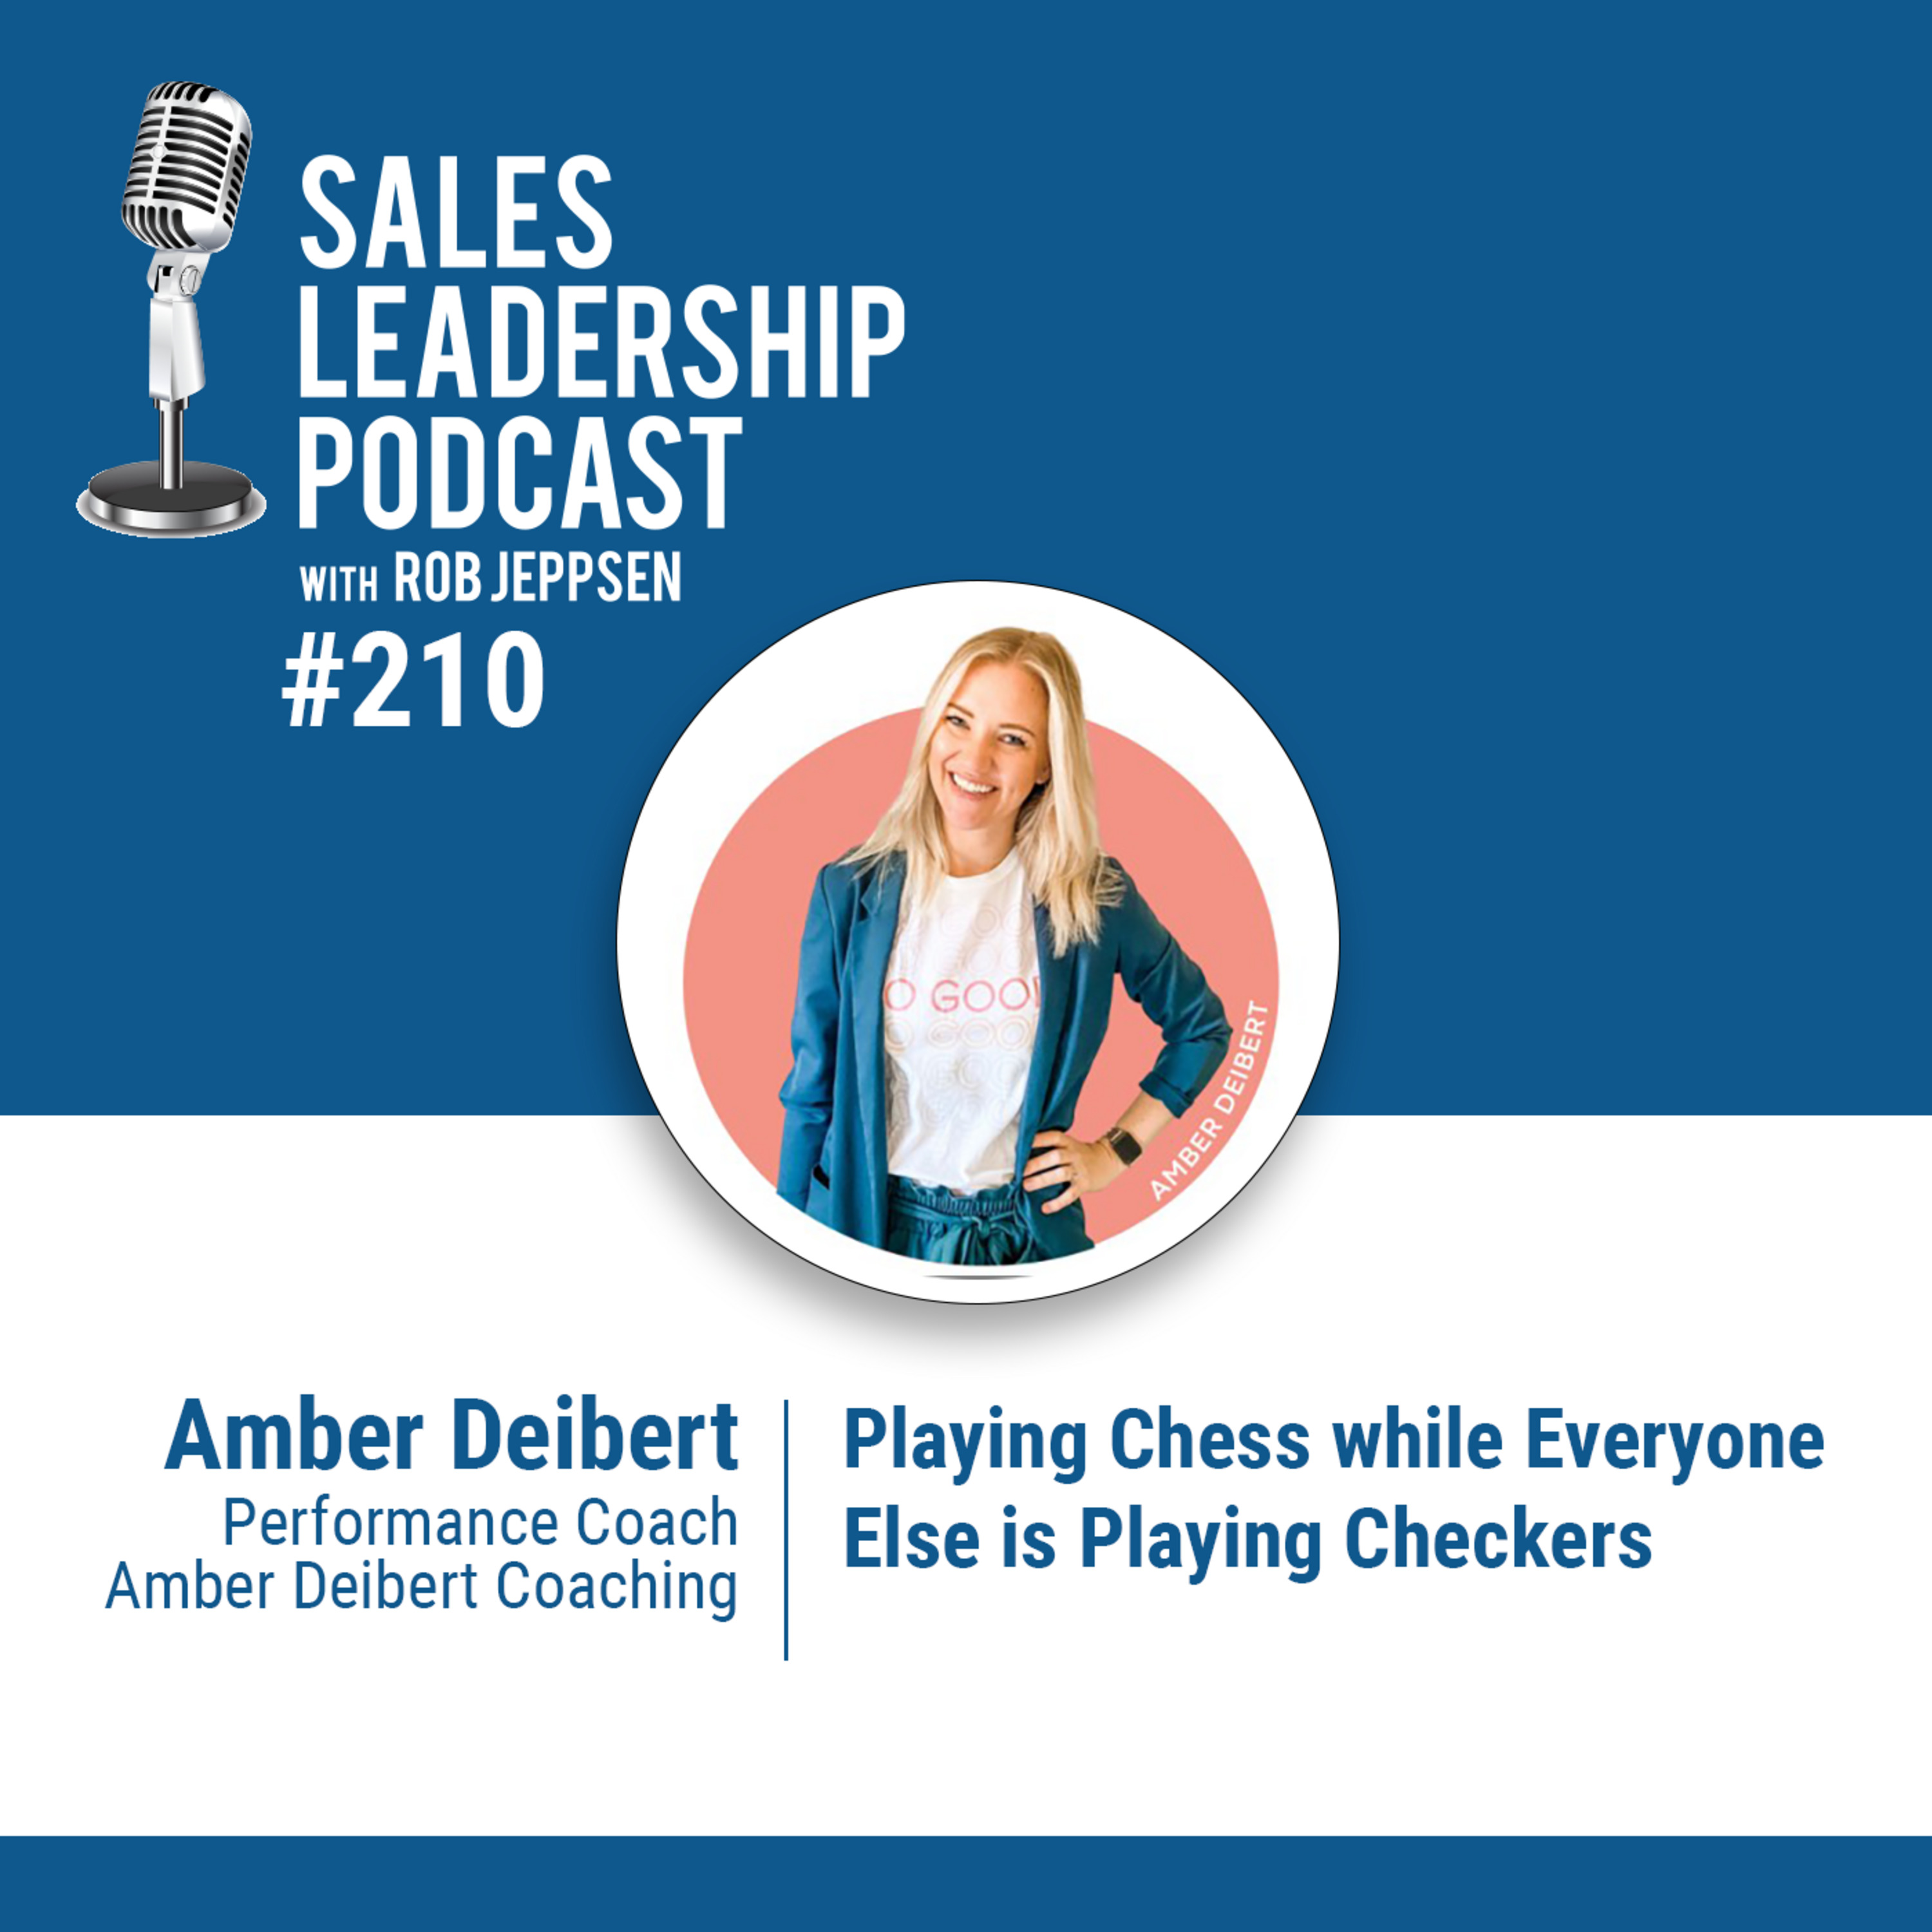 Episode 211: #210: Amber Deibert, Performance Coach — Playing Chess while Everyone Else is Playing Checkers